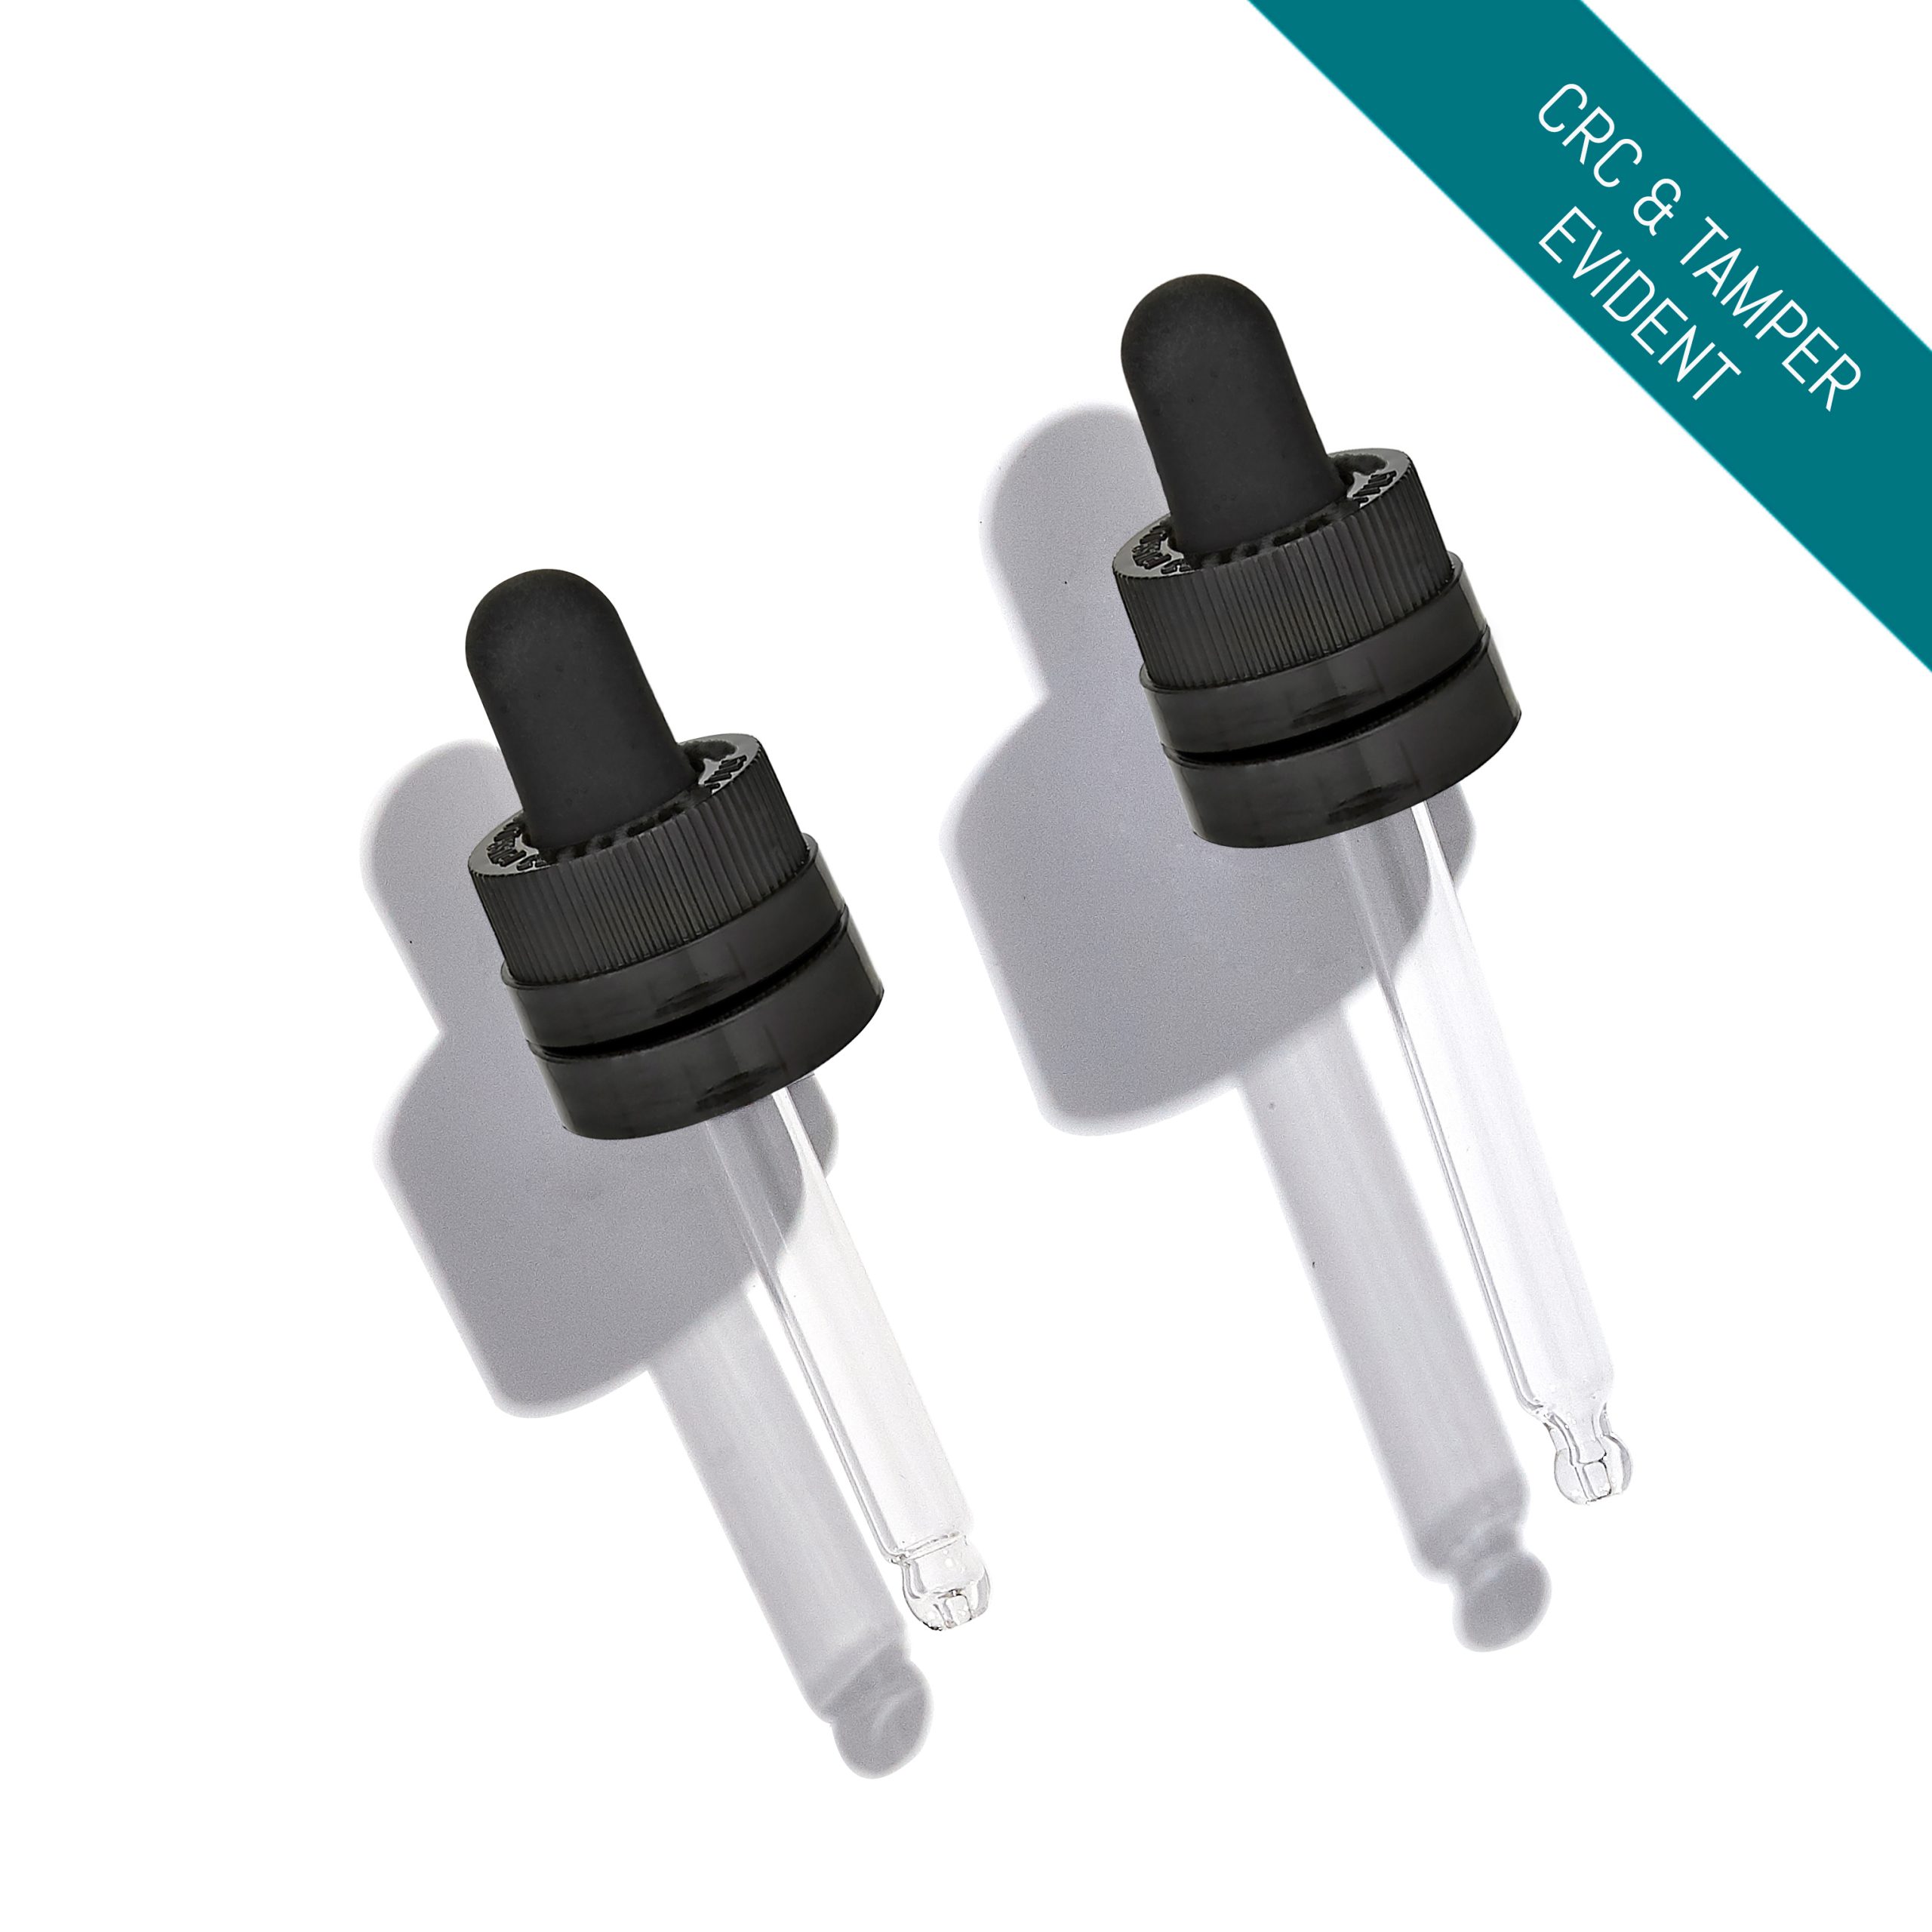 Related product: CRAM_PPDR | CRC & TAMPER EVIDENT Dropper